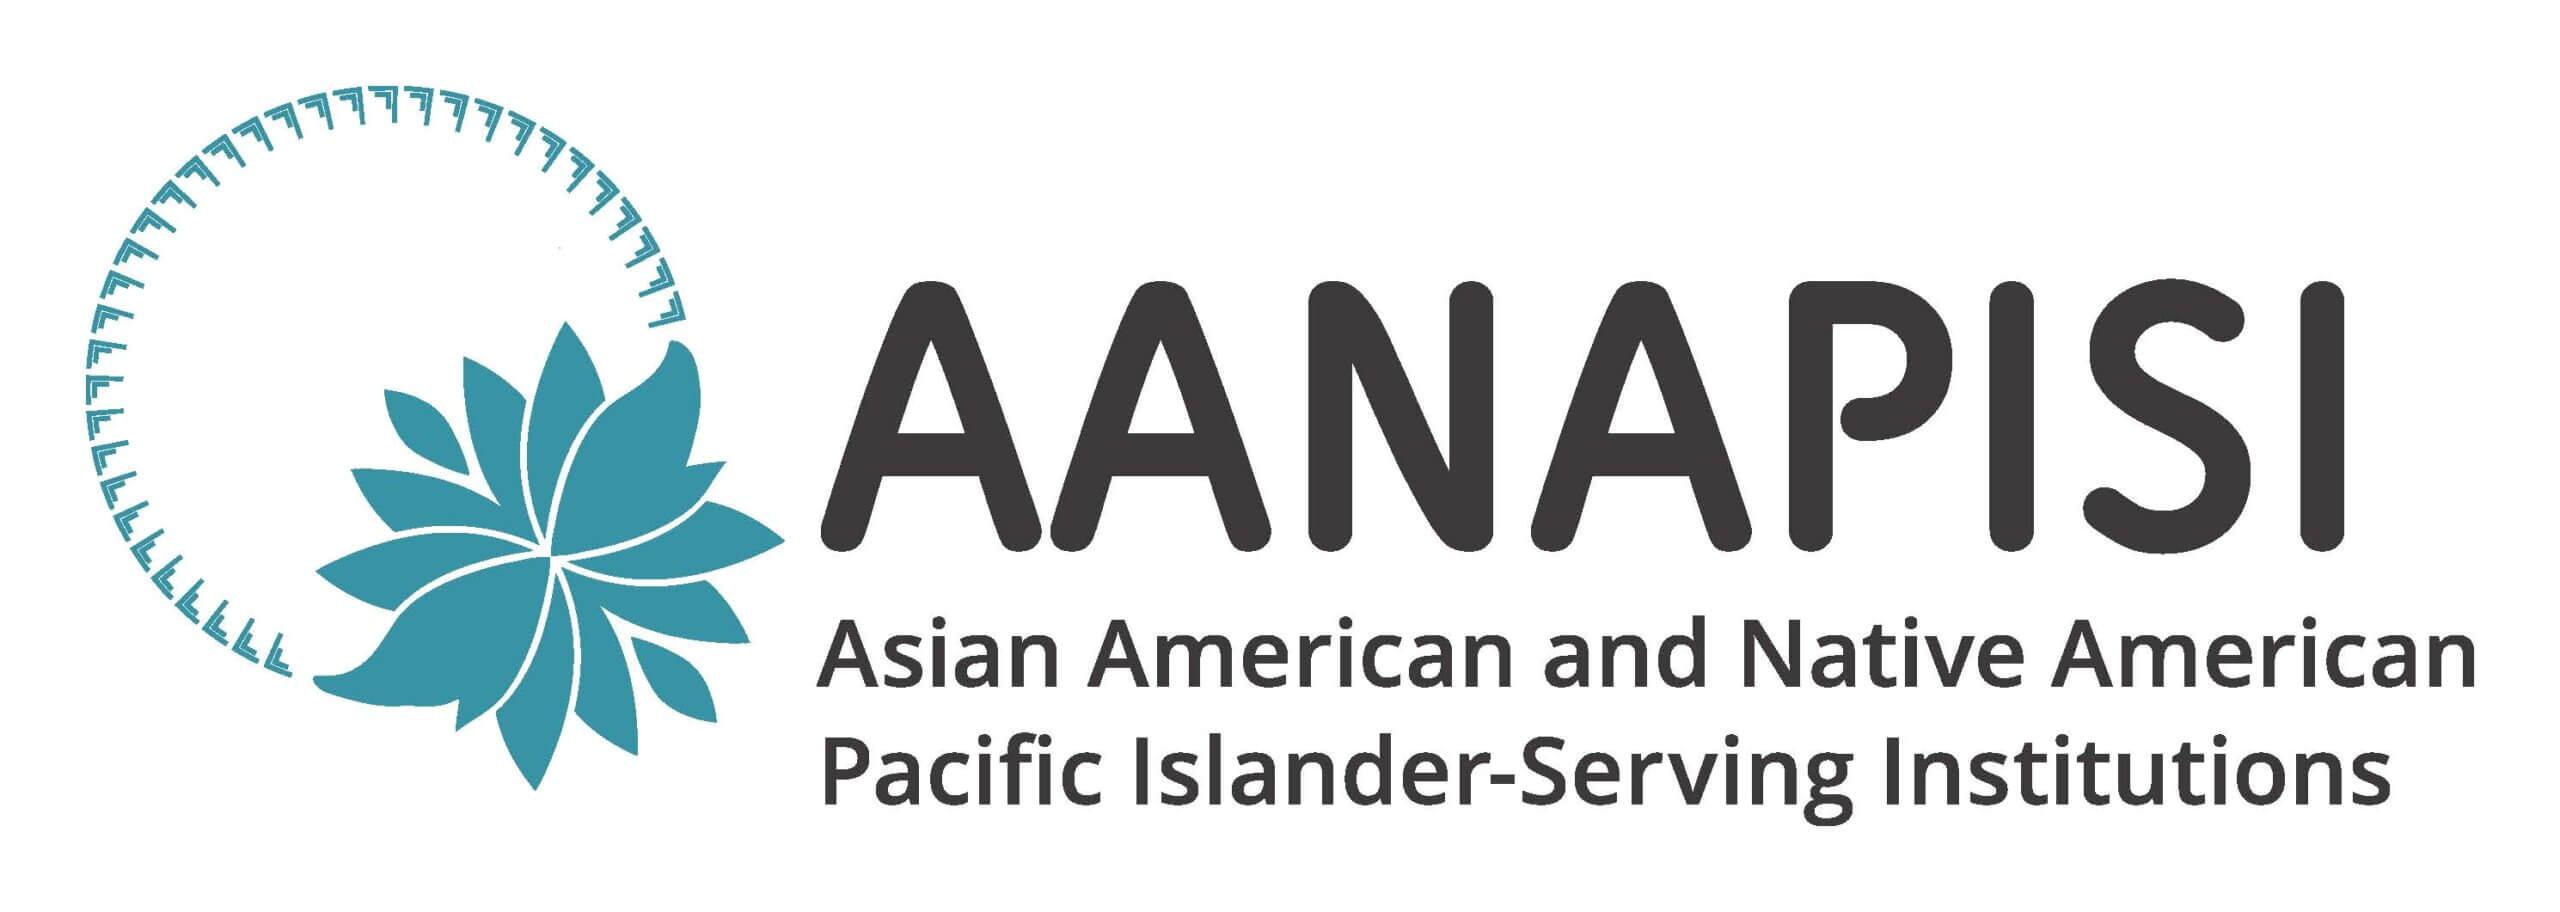 Asian American and Native Pacific Islander Serving Institutions (AANAPISI) logo